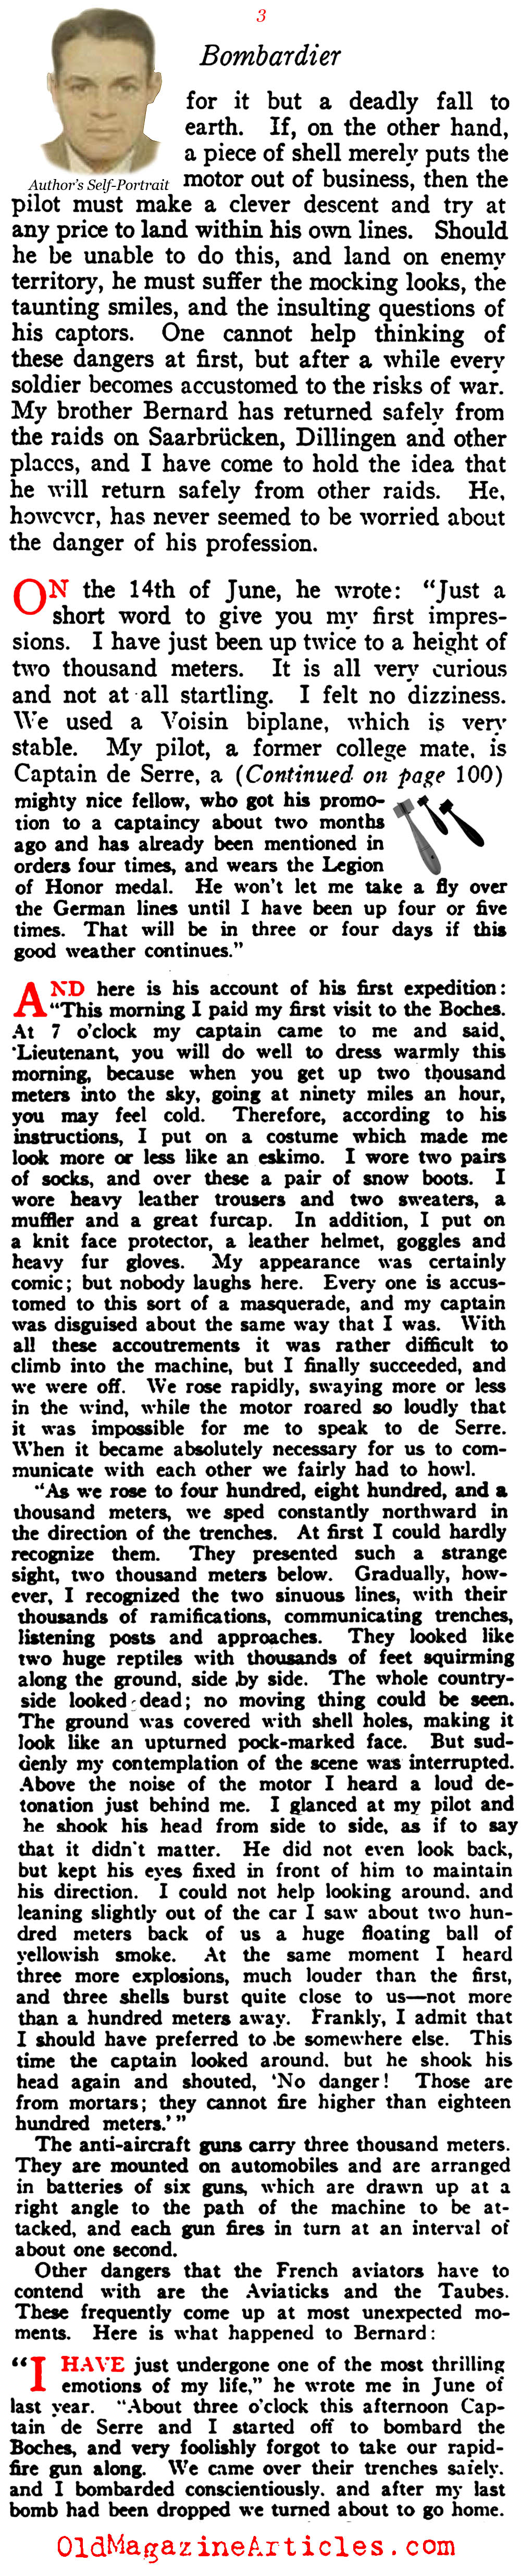 The Experiences of a Bombardier in the Young French Air Corps  (Vanity Fair, 1916)